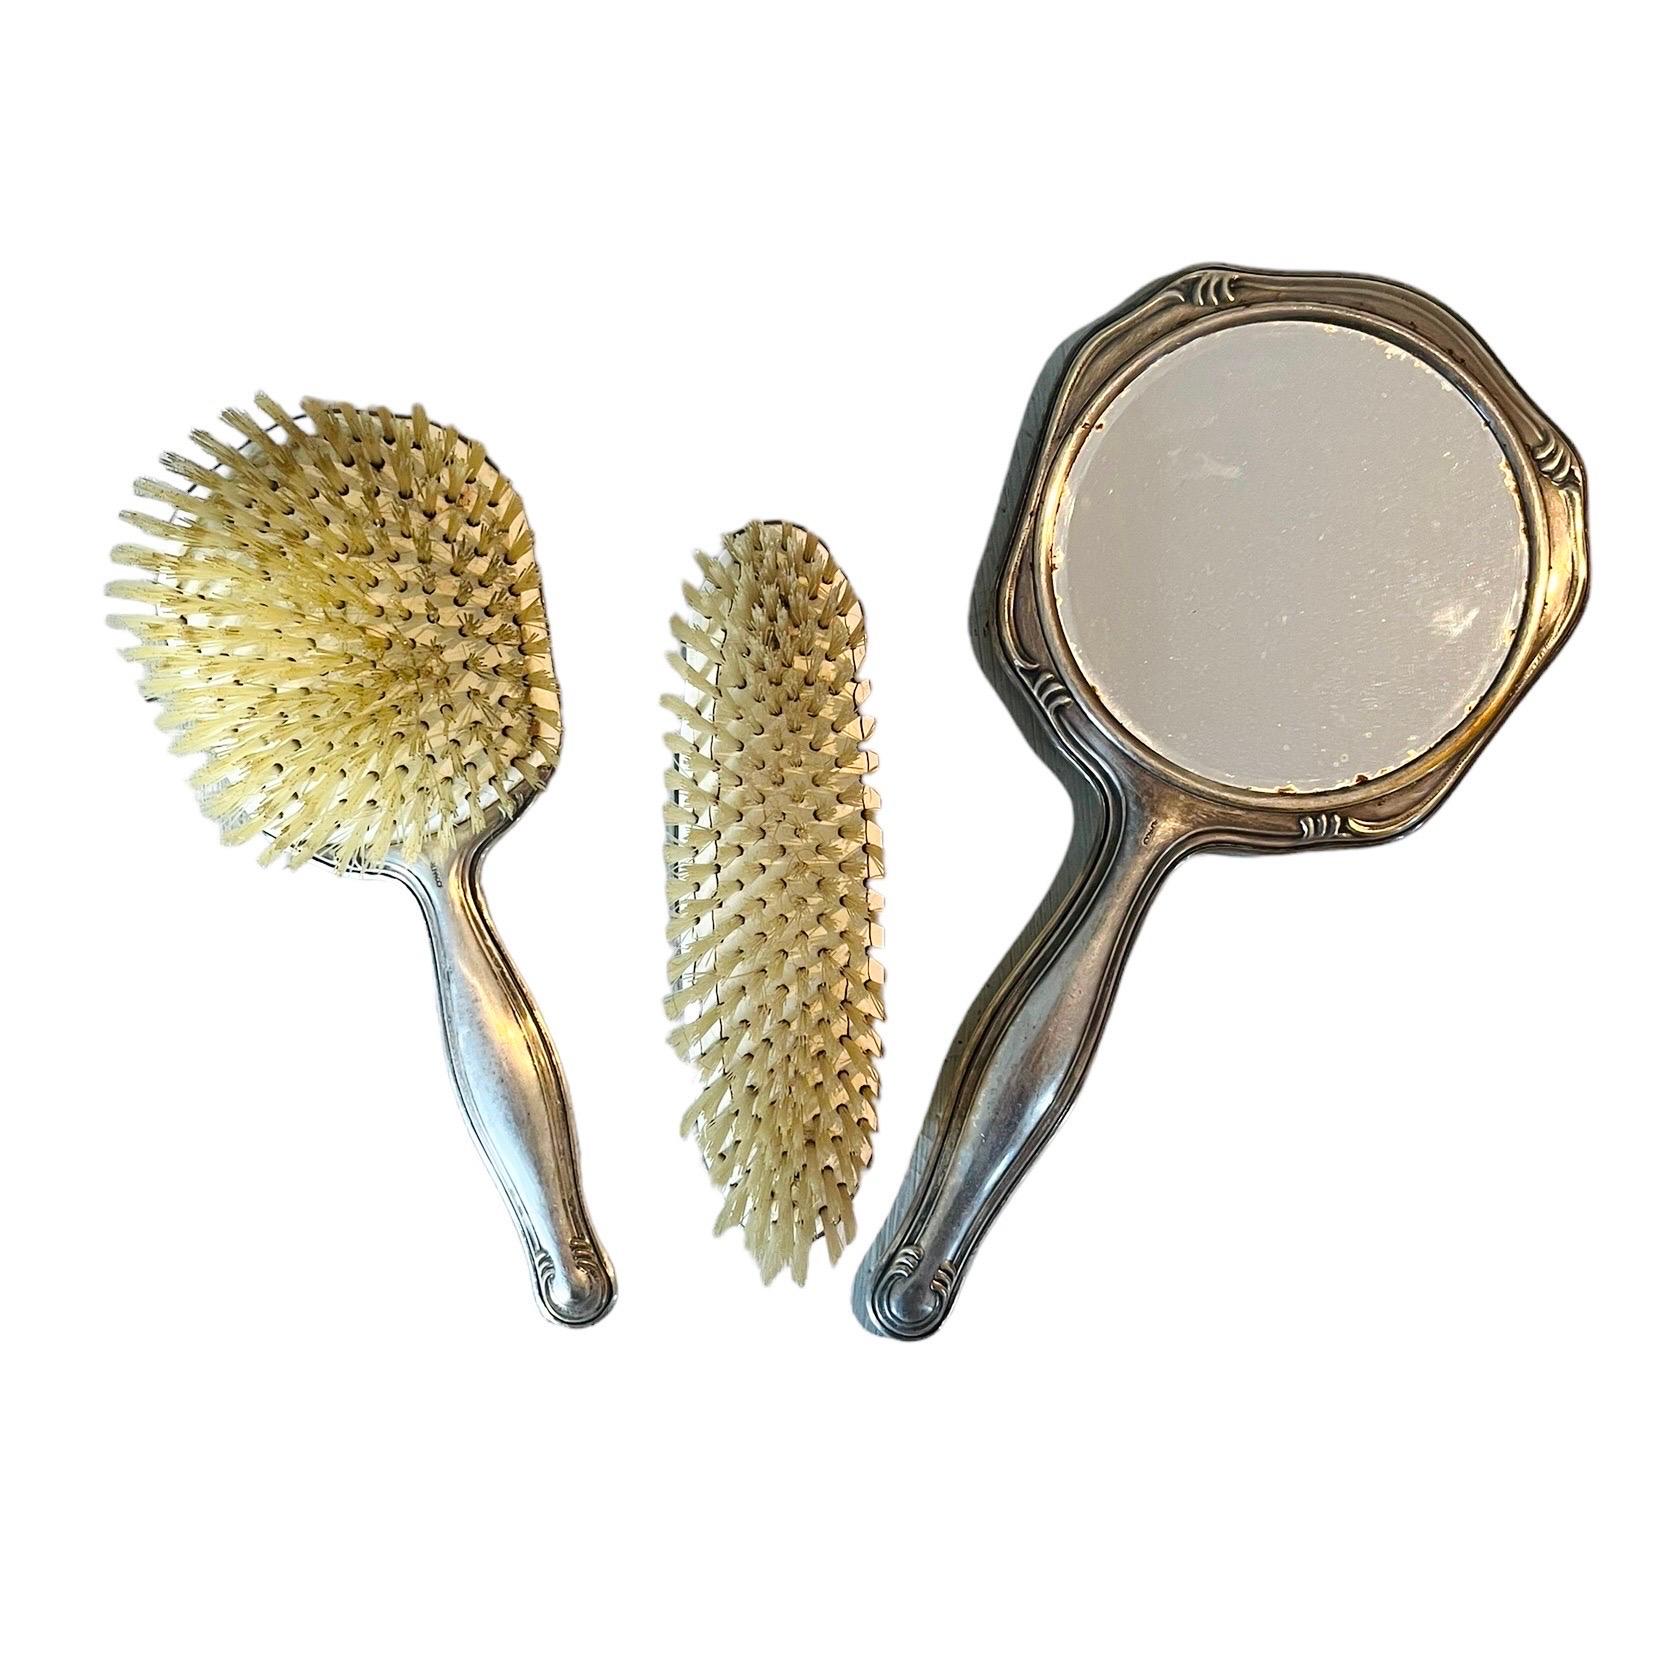 Very pretty toiletry set in silver metal with chiseled decoration of foliage scrolls with guilloche background including a mirror called 